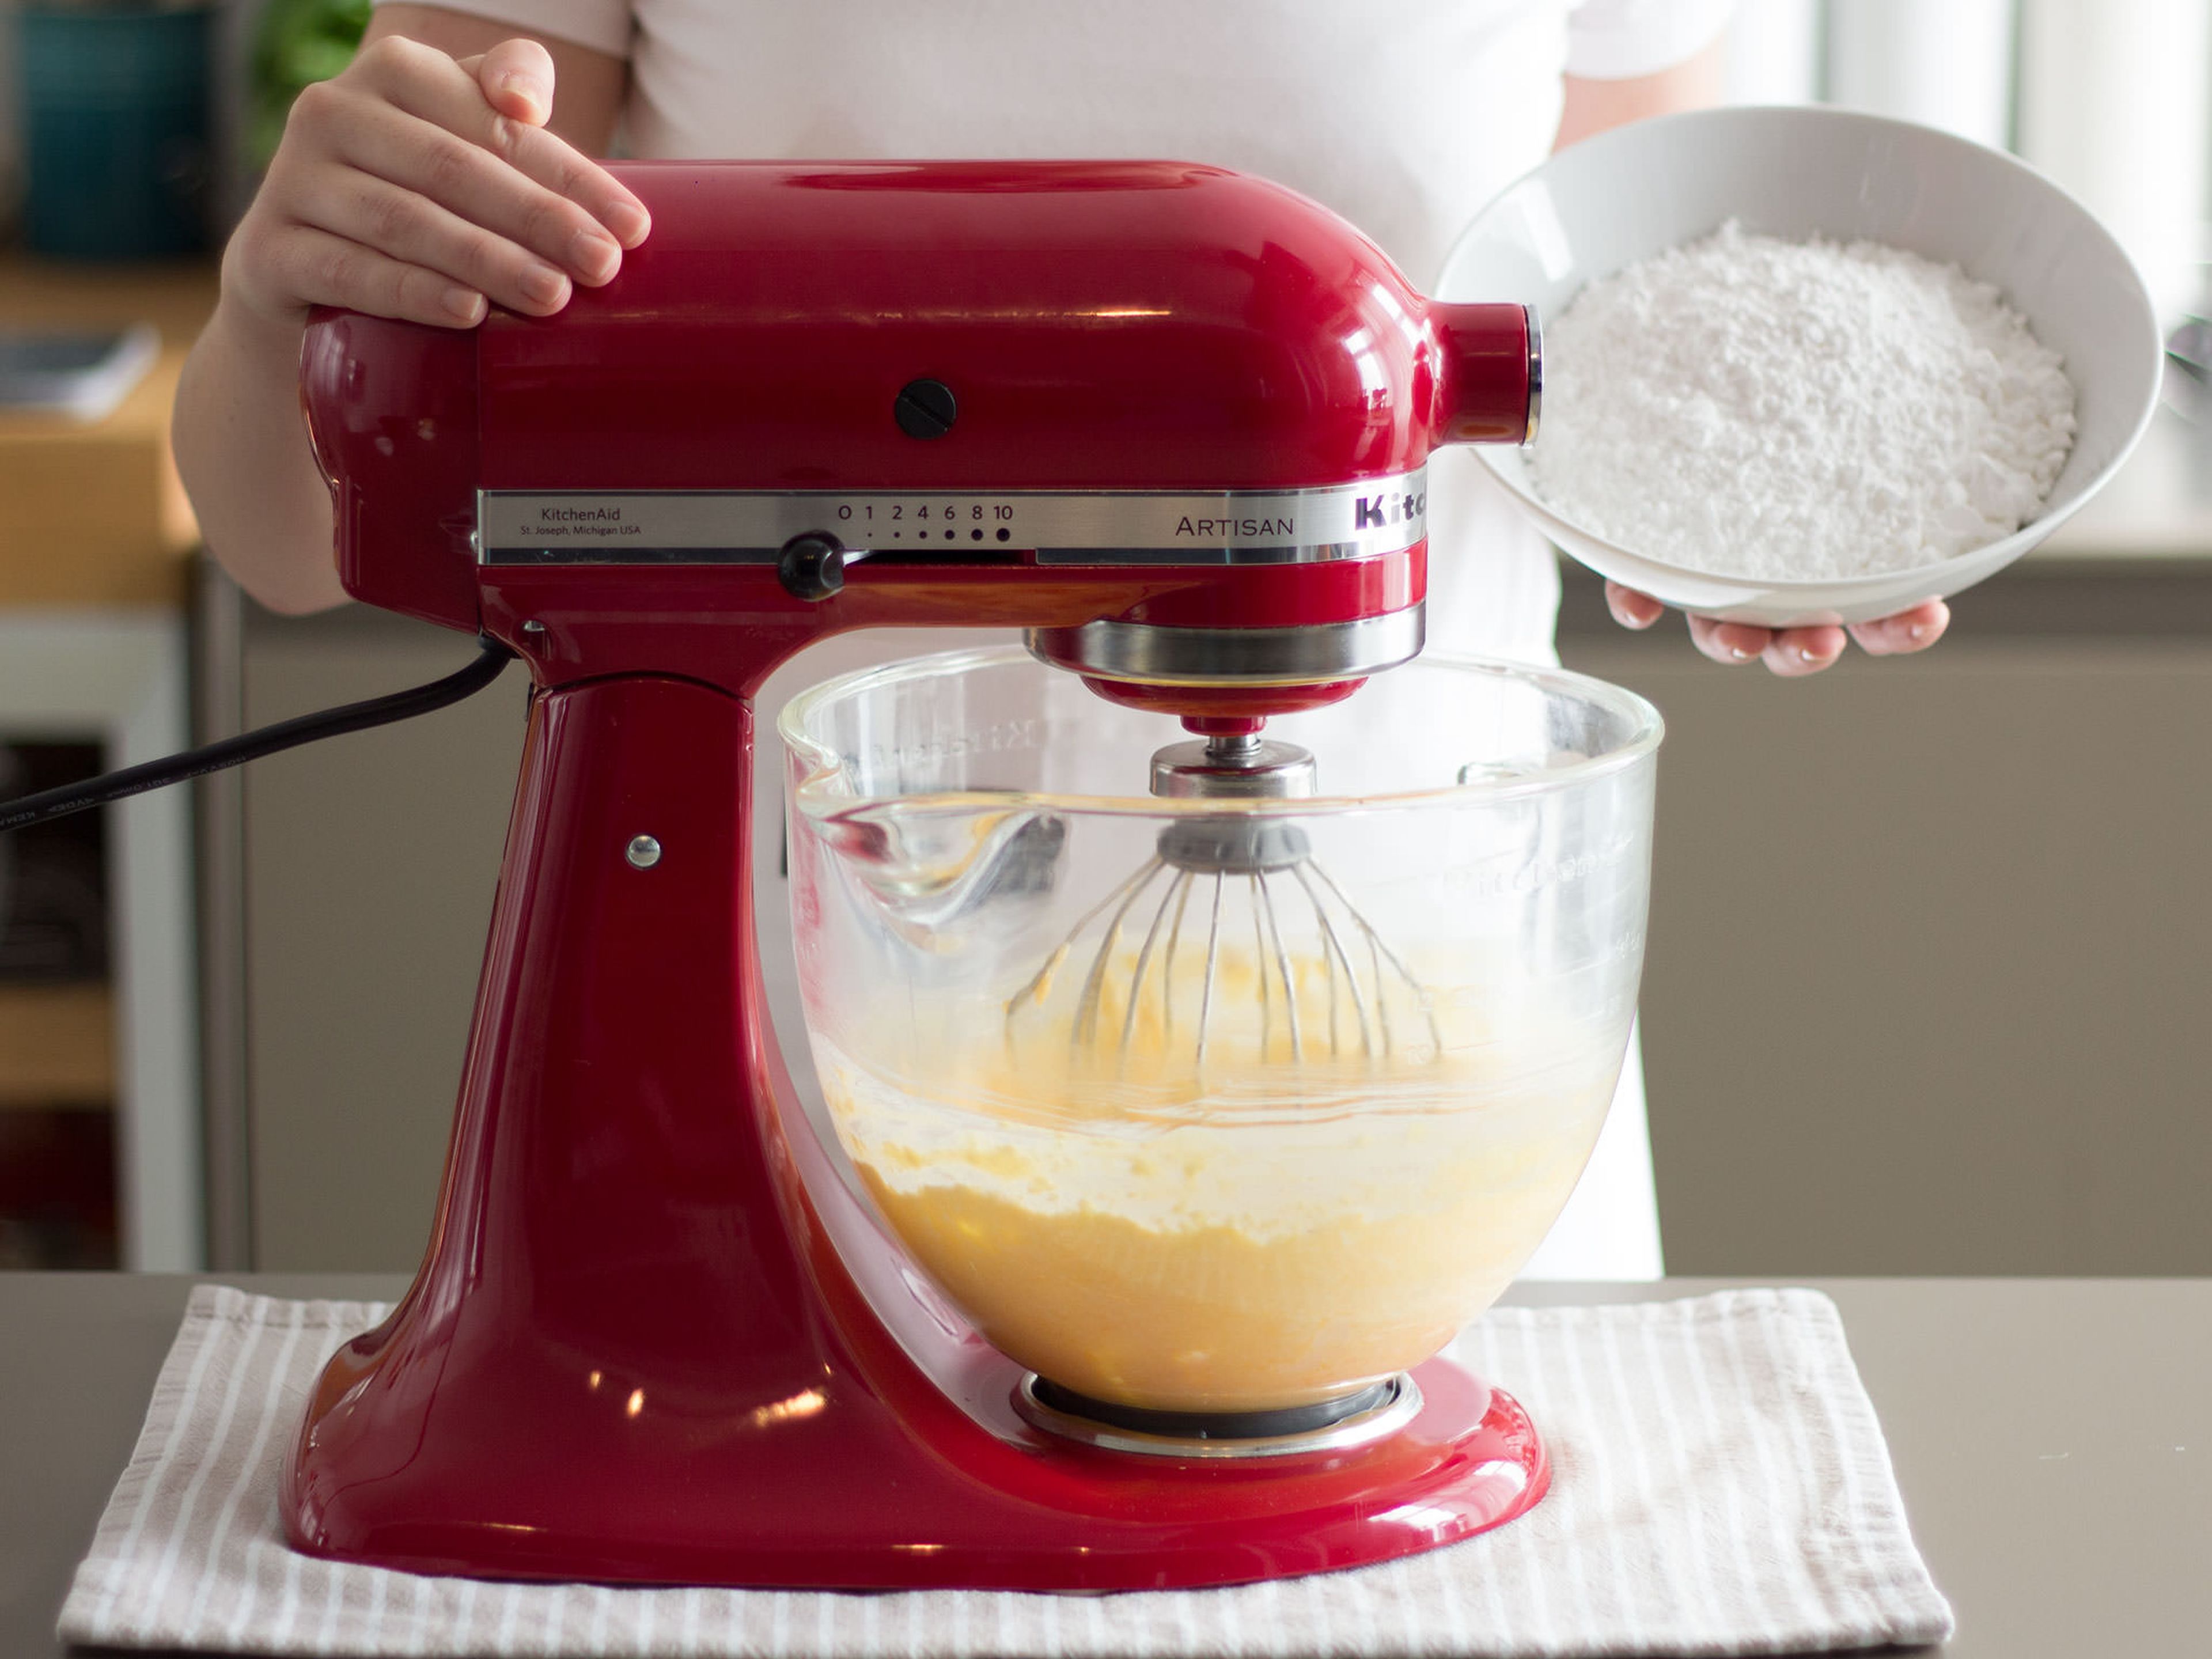 Beat together butter, egg yolks, and confectioner’s sugar for approx. 3 – 5 min.